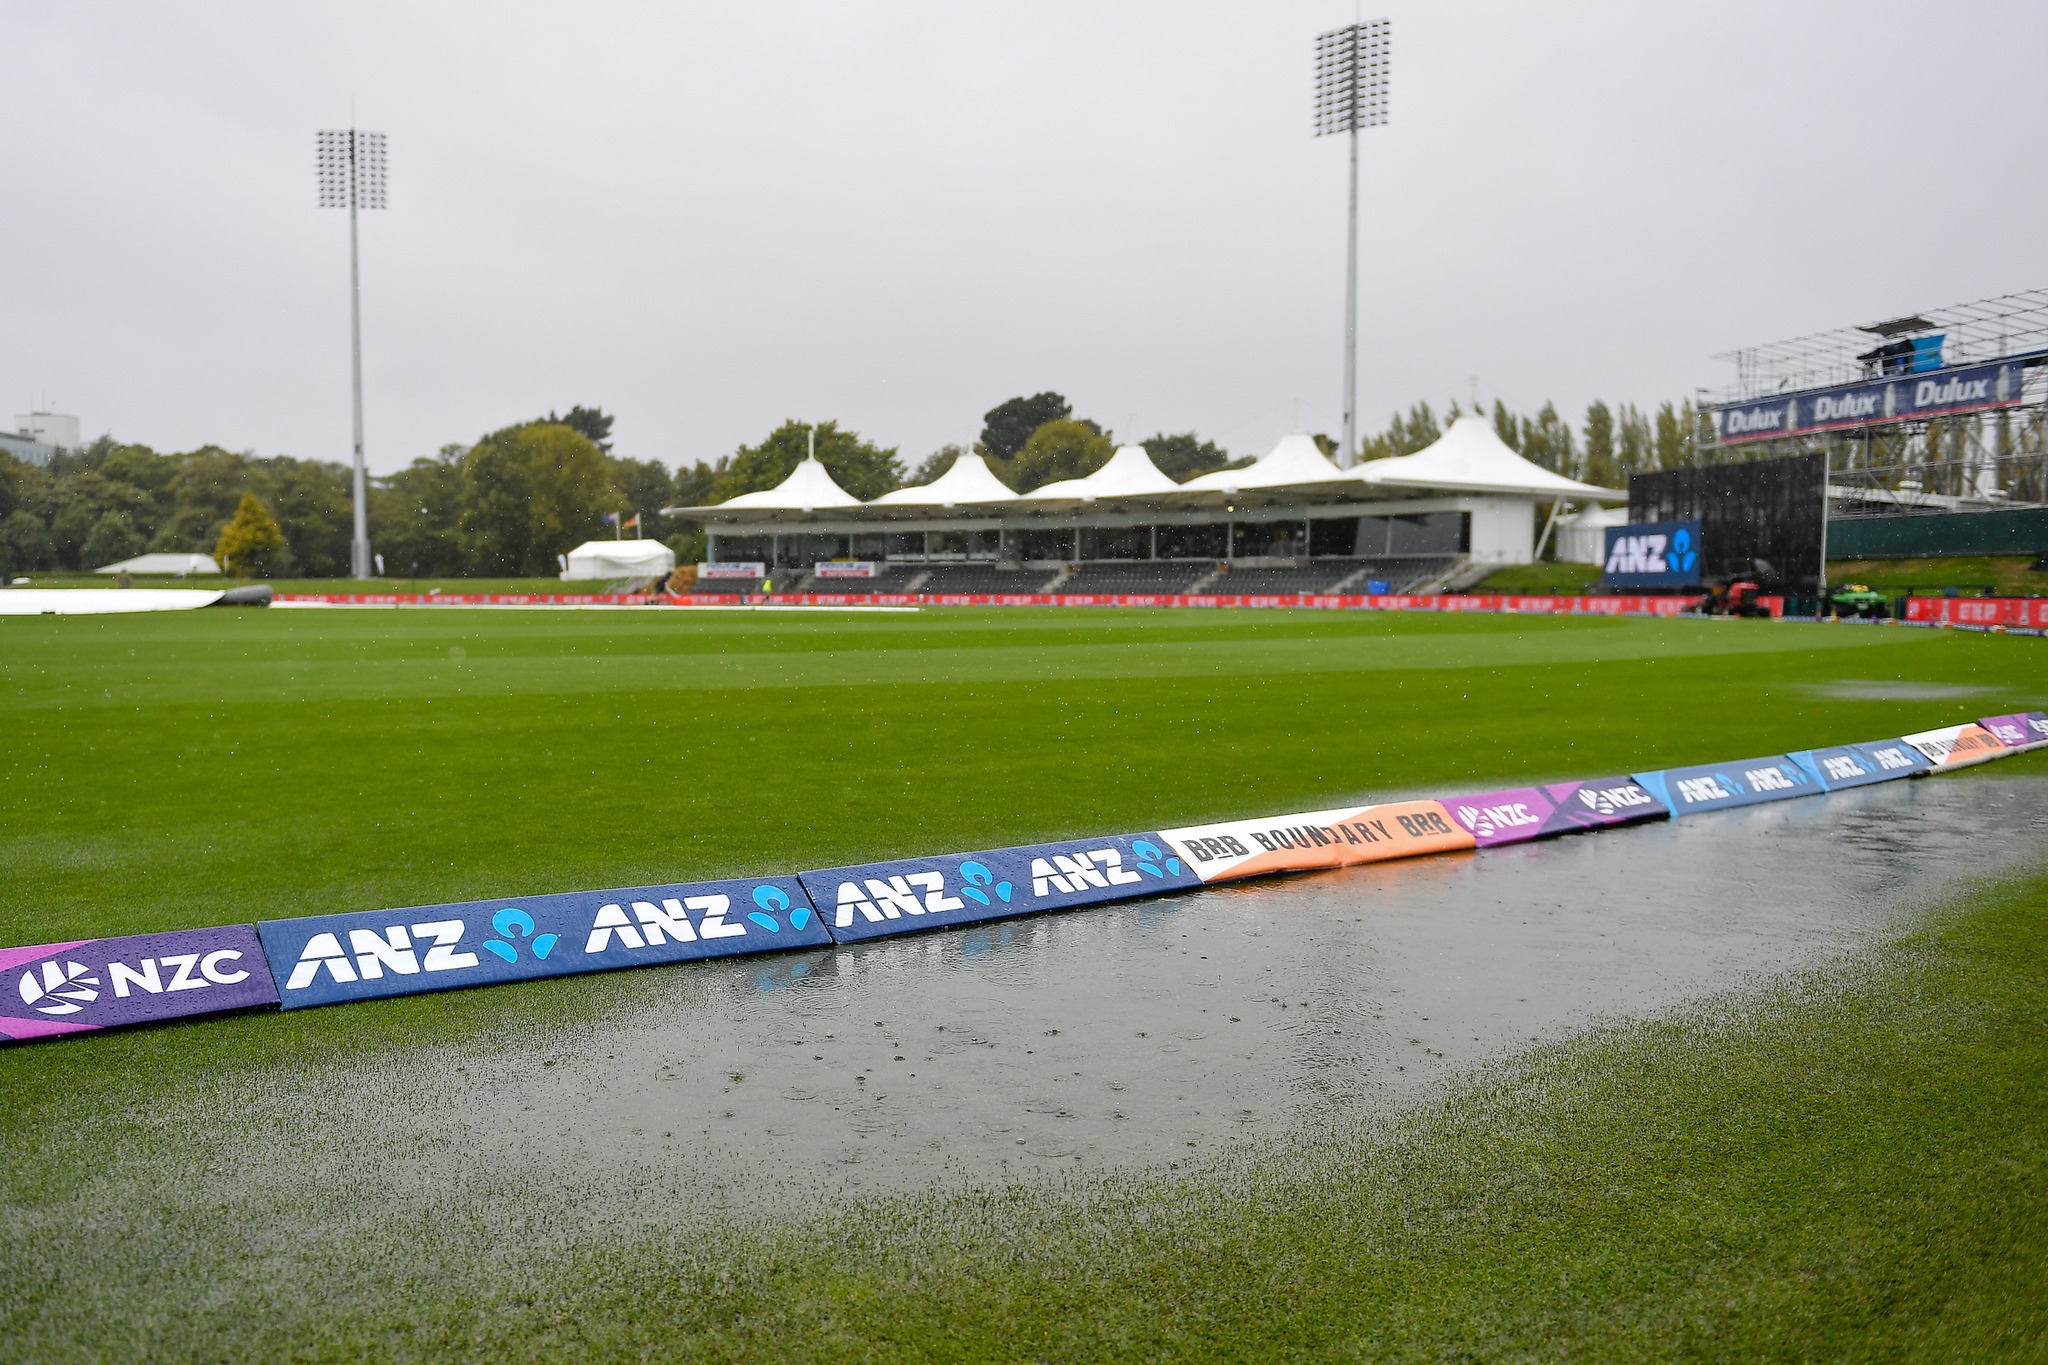 Covers are on for the 2nd Sri Lanka ODI